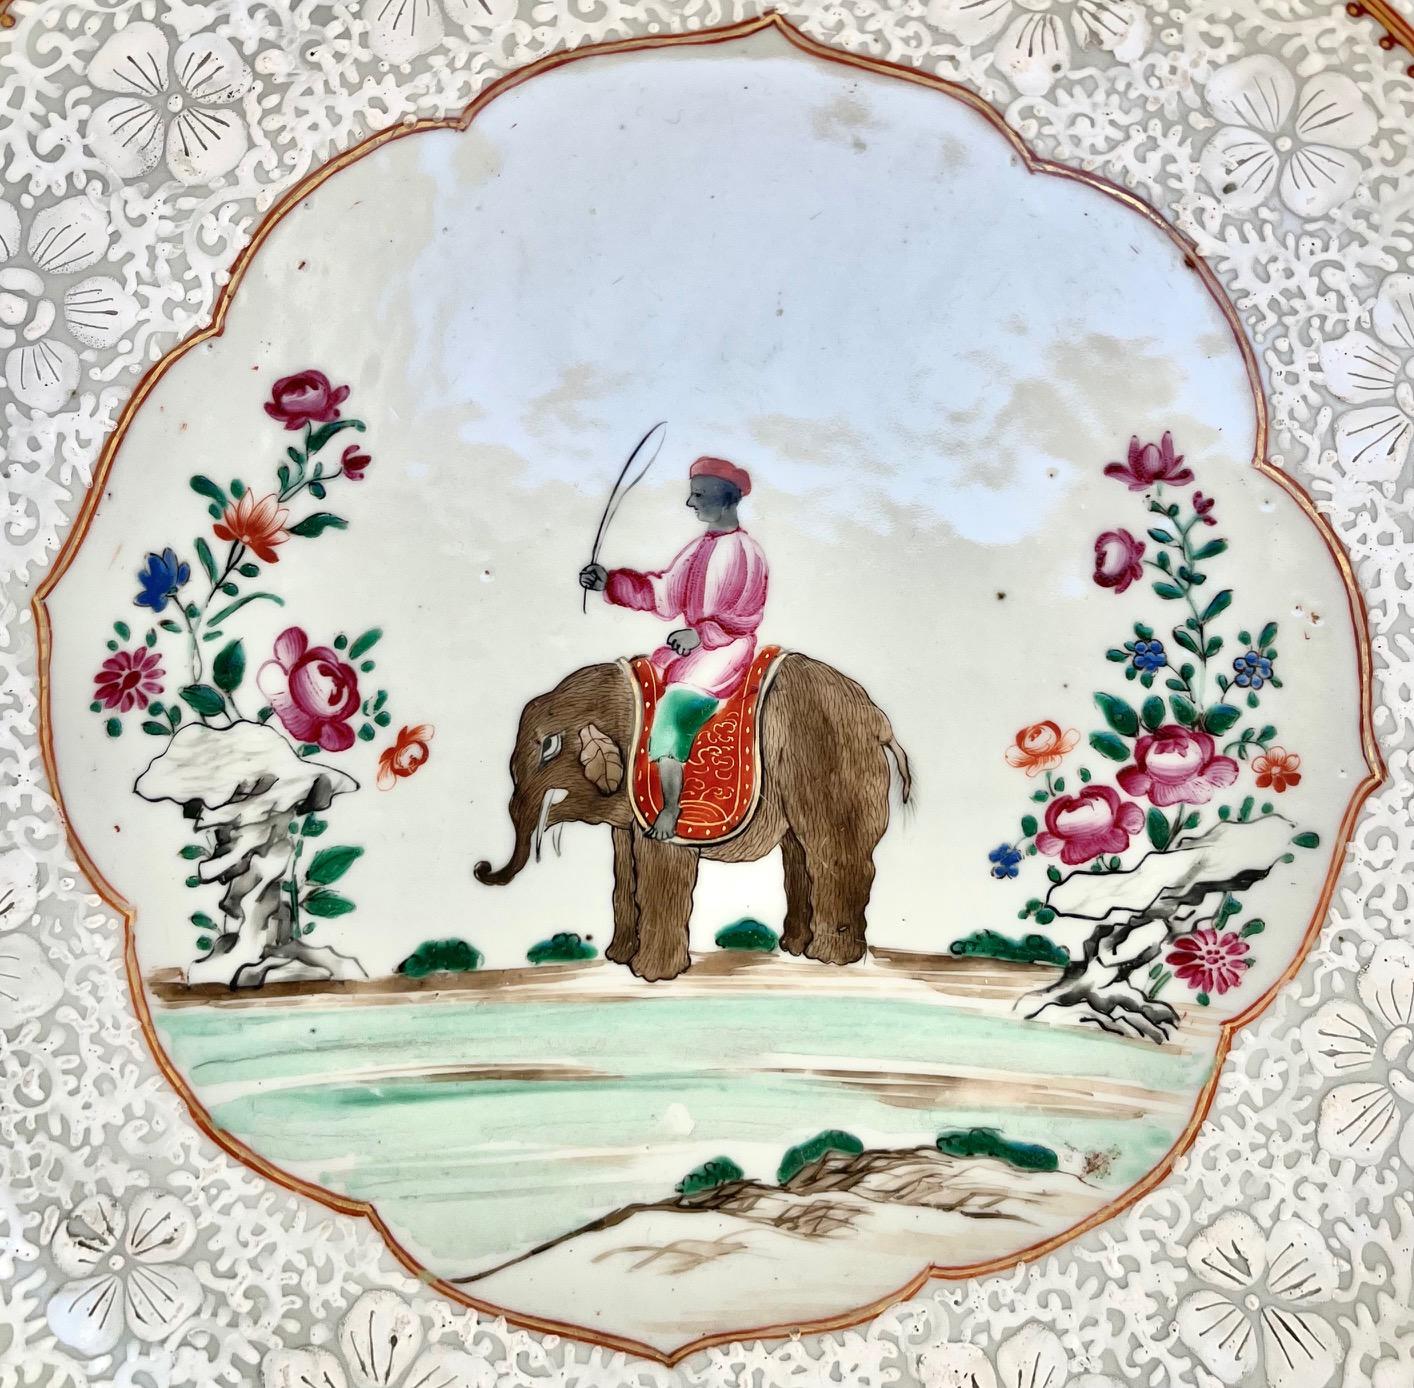 Chinese Export Anglo-Indian Market Elephant & Mahout Chargers, Pair, circa 1760 In Good Condition For Sale In Kinderhook, NY